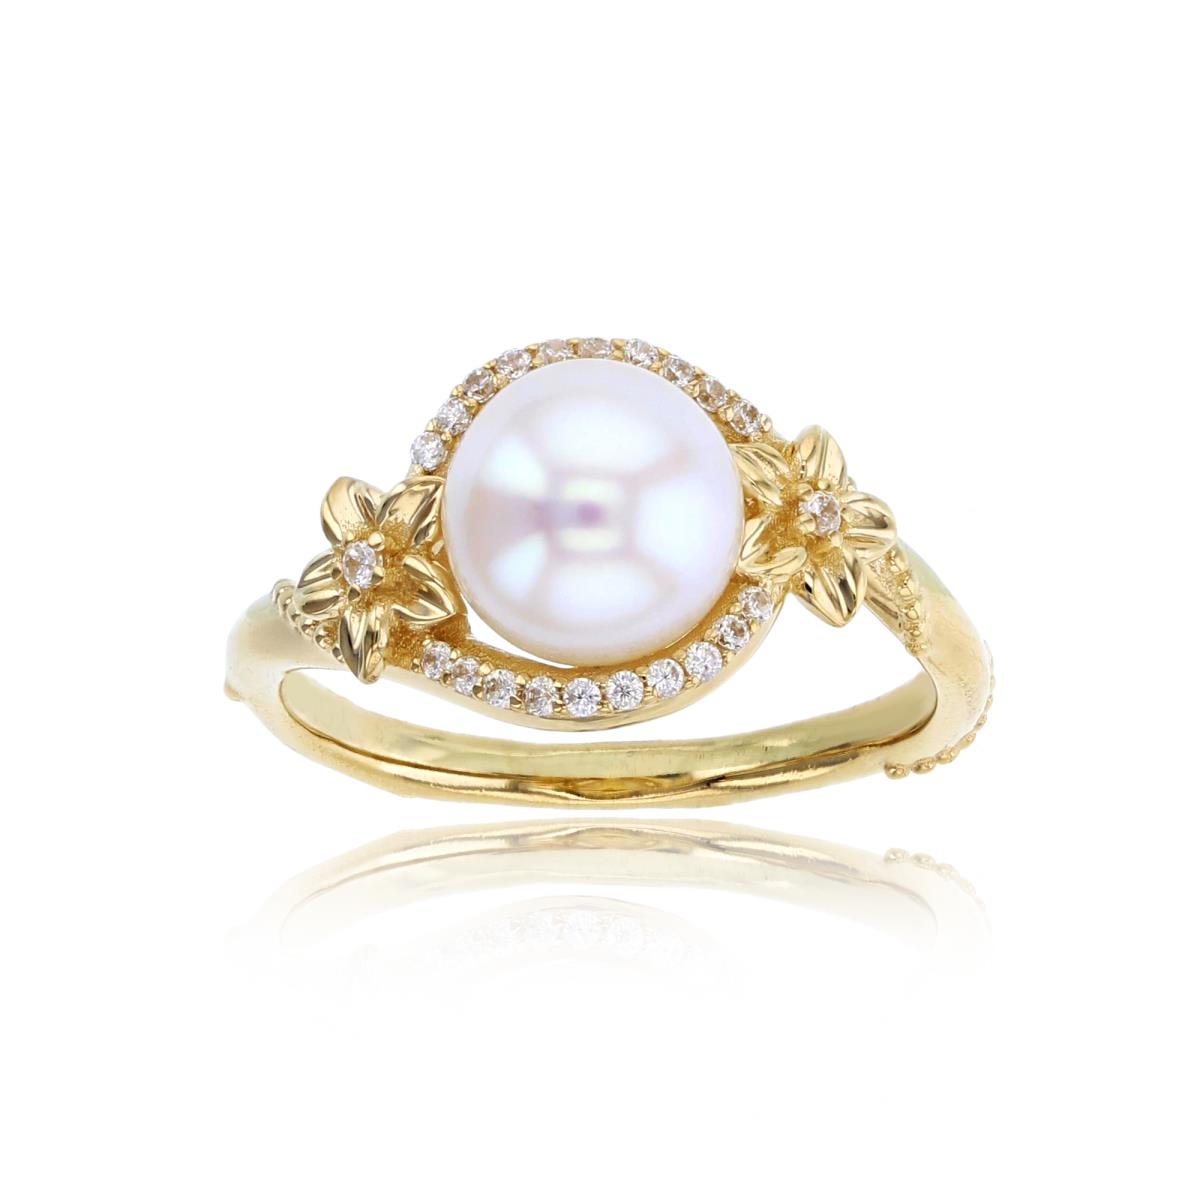 10K Yellow Gold 0.10 CTTW Rnd Diam & 8mm Rnd White Pearl with Flower Halo Ring